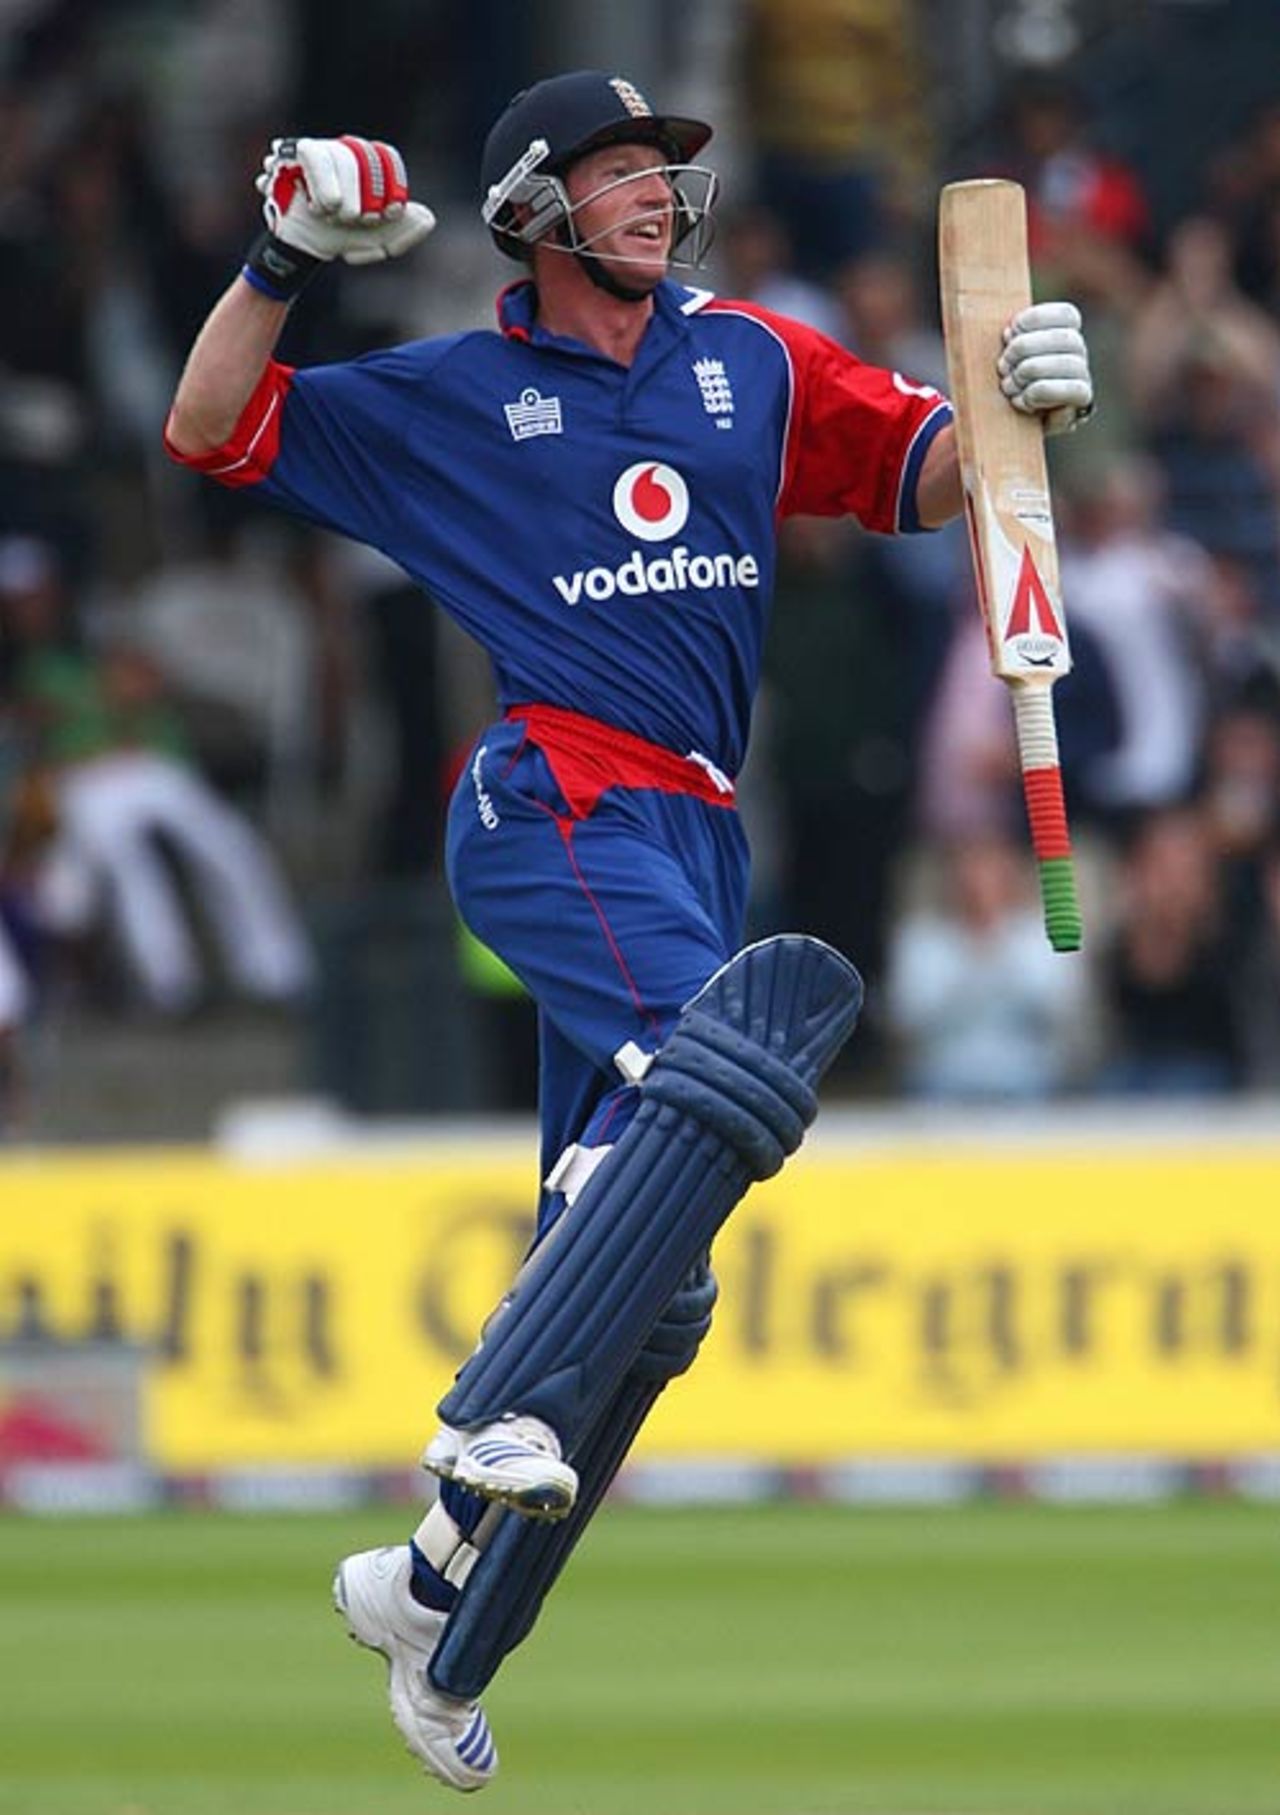 Paul Collingwood celebrates England's series win after scoring 64, England v India, 7th ODI, Lord's, September 8, 2007